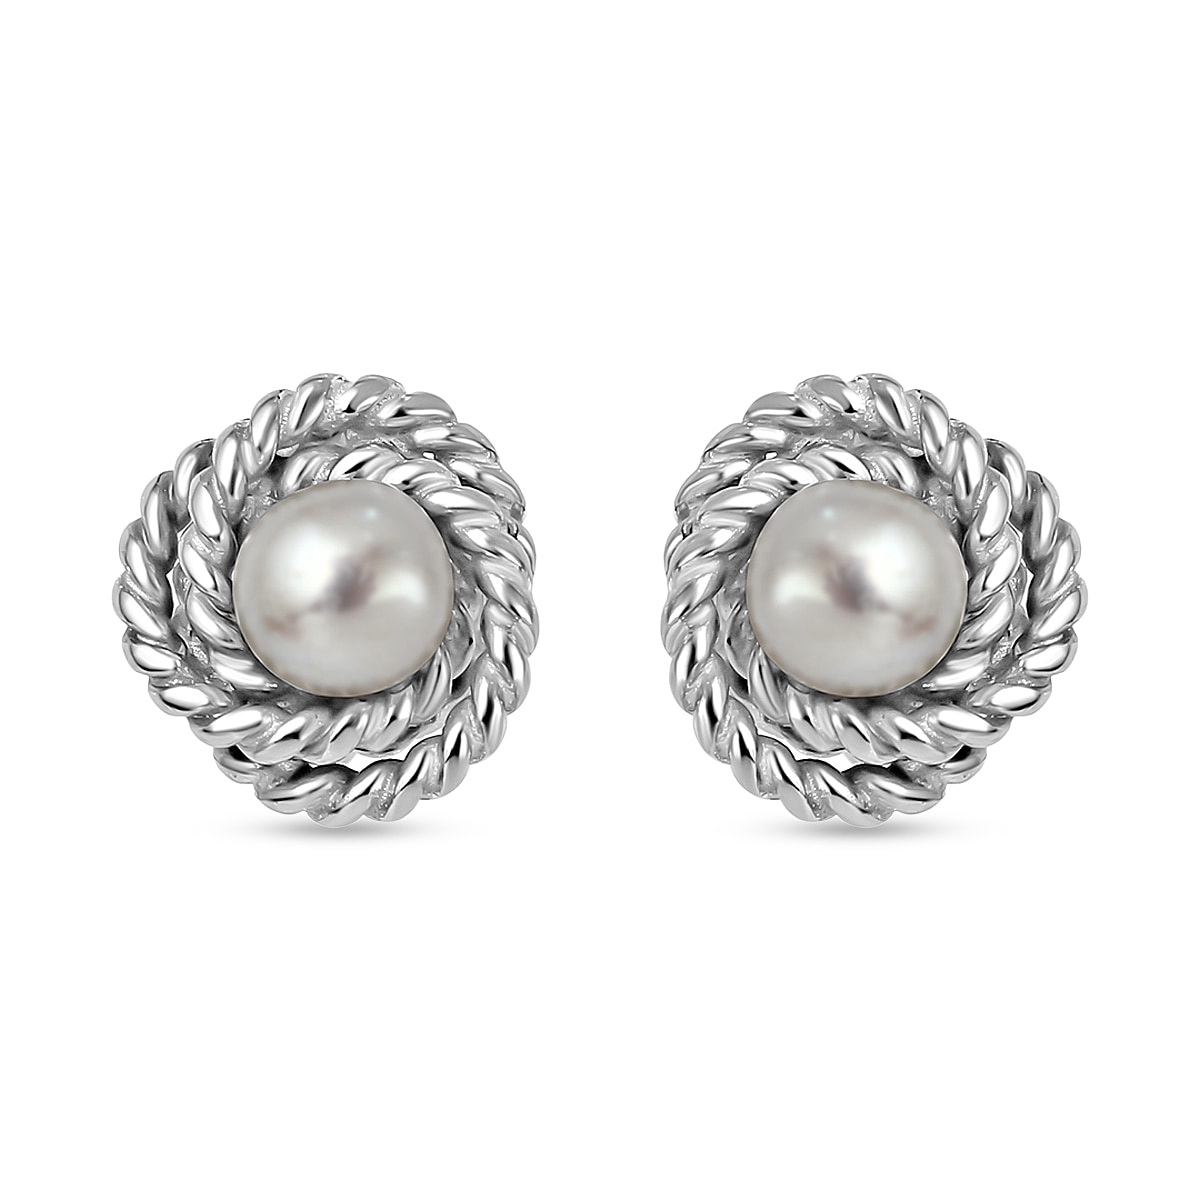 Rhodium Overlay Sterling Silver Fresh Water Pearl Knot Earrings